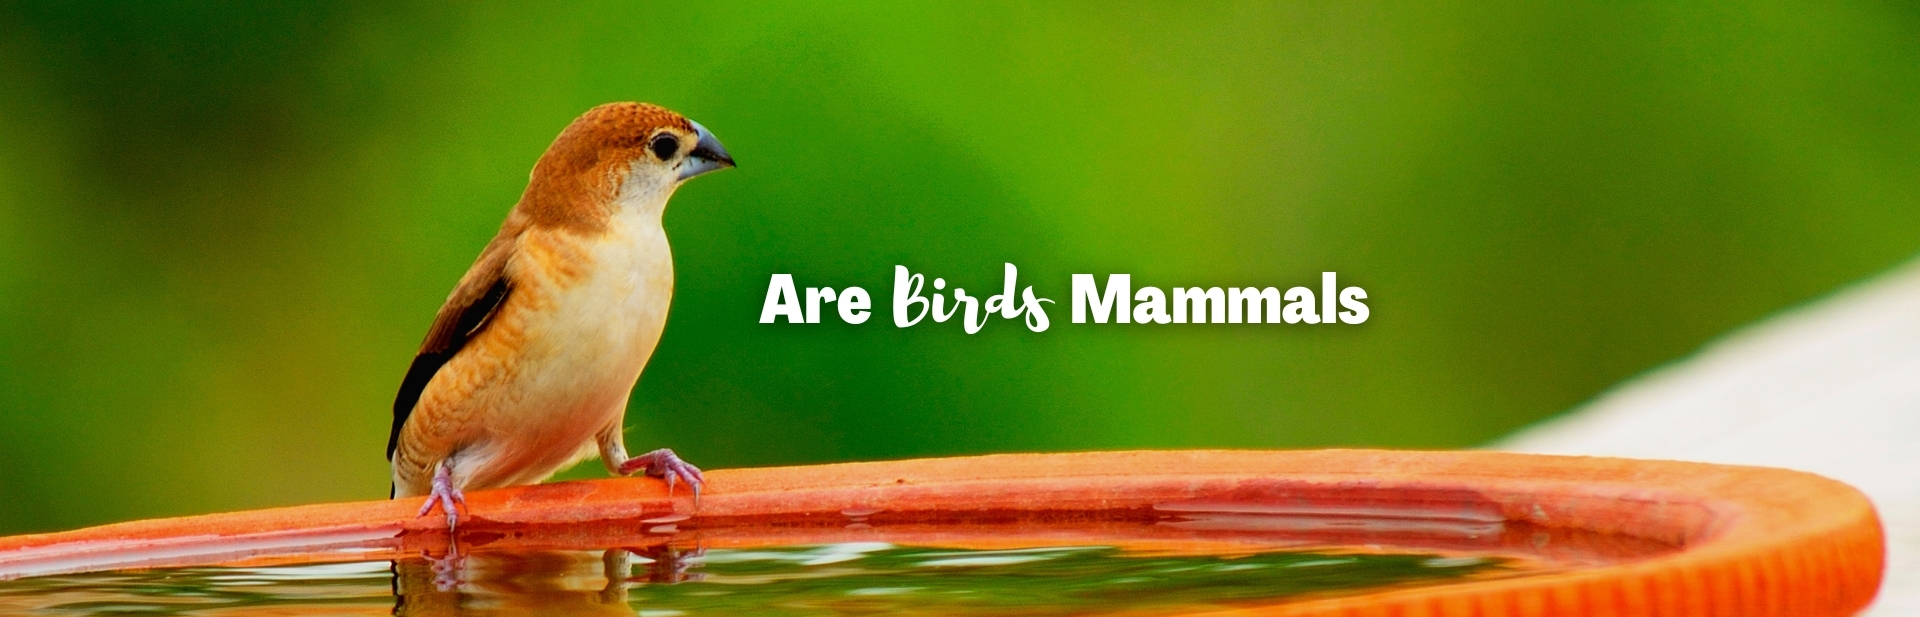 Are Birds Mammals? The Difference Between Feathers & Fur